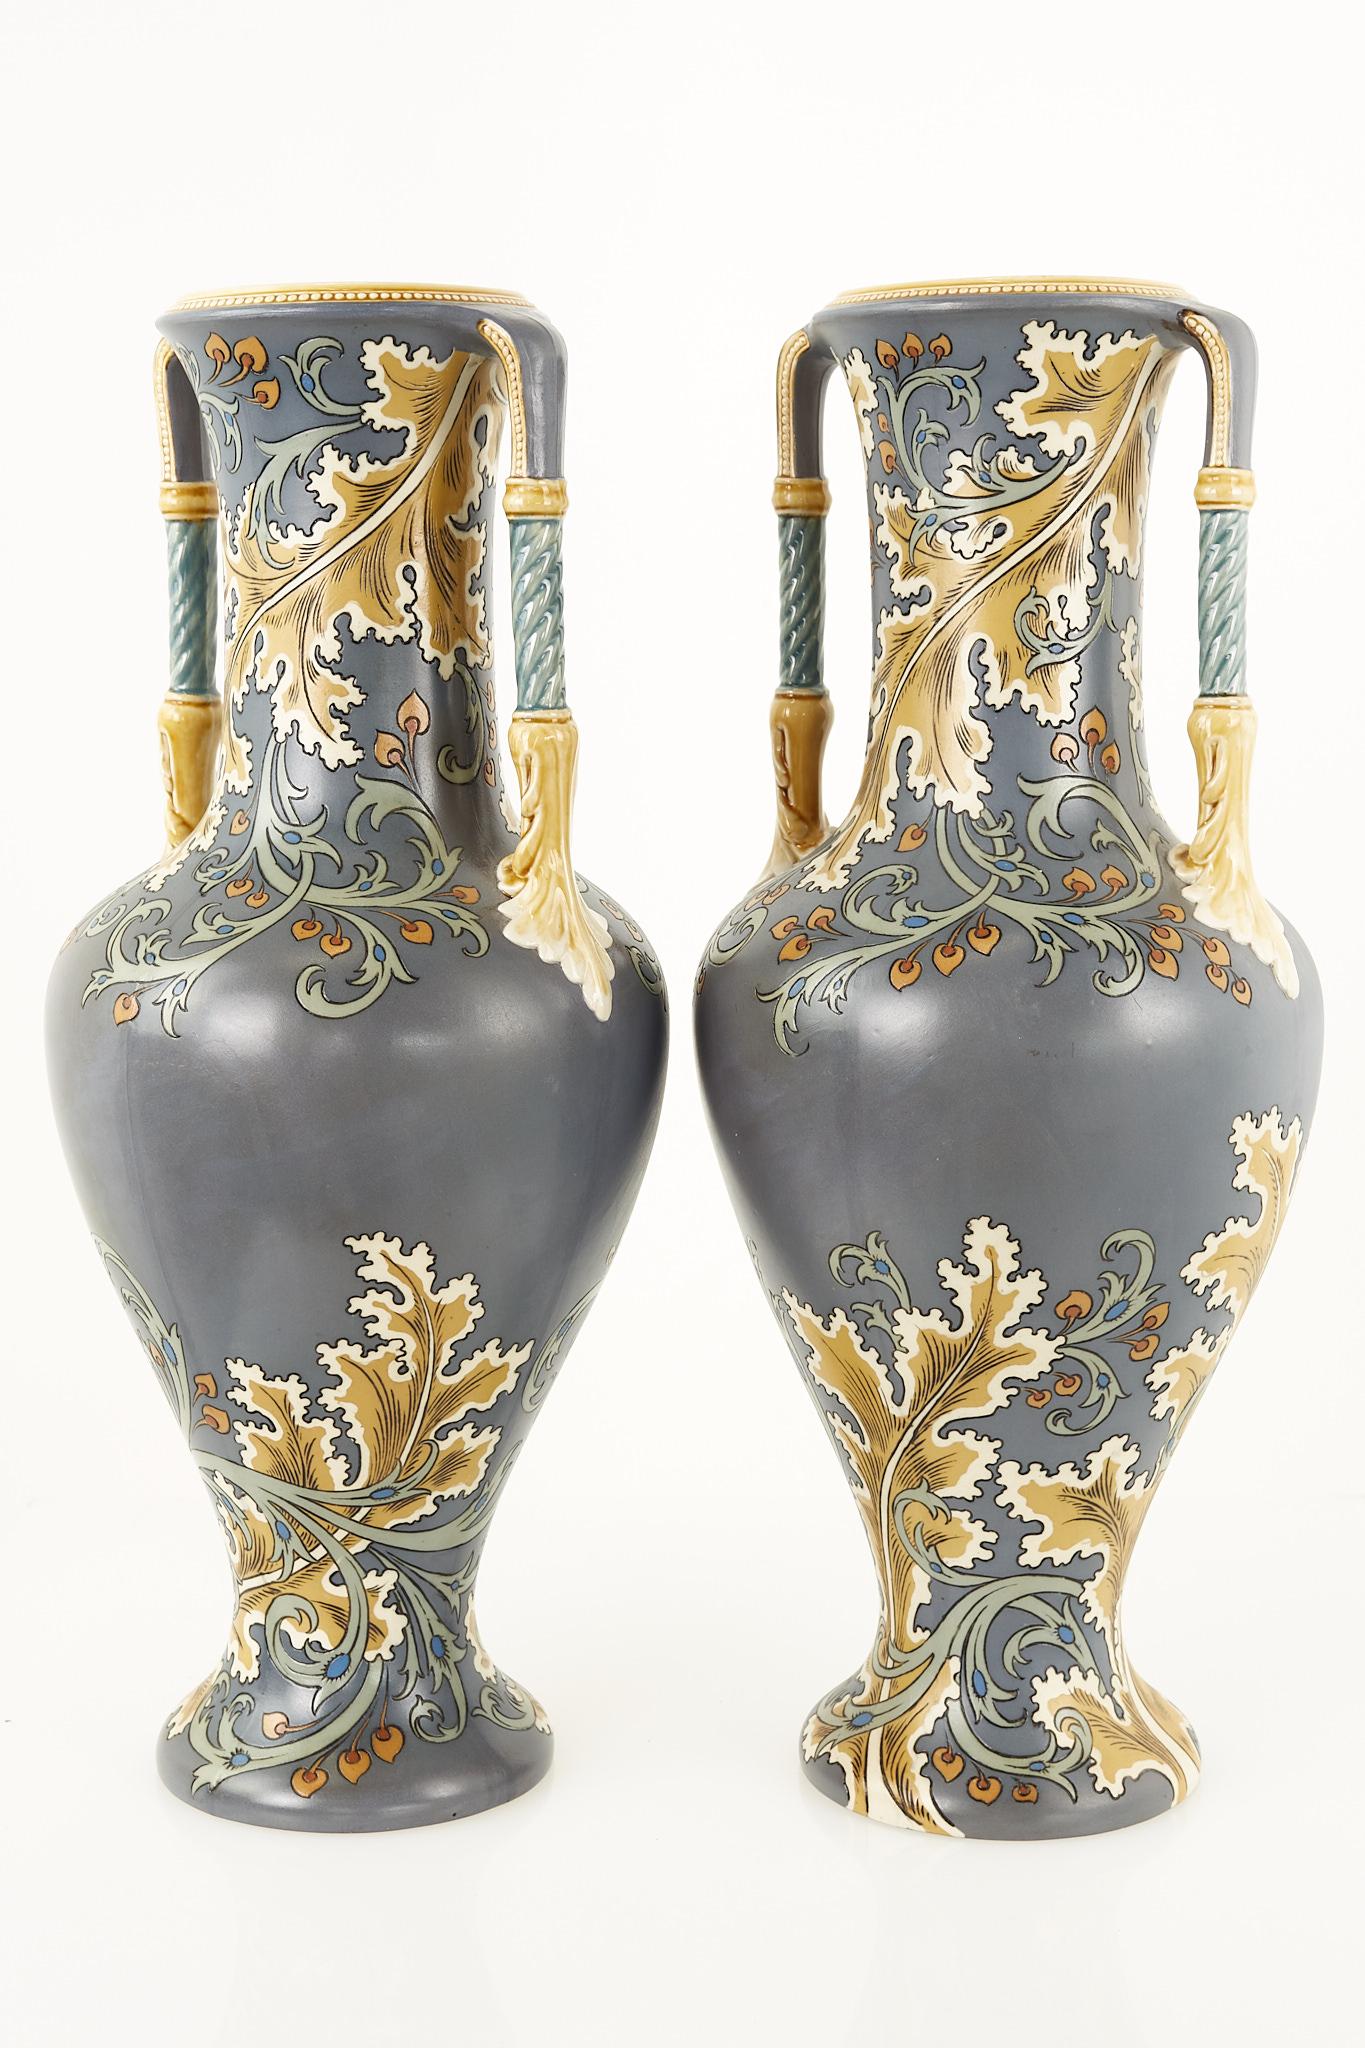 Floral Art Nouveau vase by Mettlach, later Villeroy & Boch - a pair

Each vase measures: 7 wide x 7 deep x 17 inches high

This pair is in excellent vintage condition

We take our photos in a controlled lighting studio to show as much detail